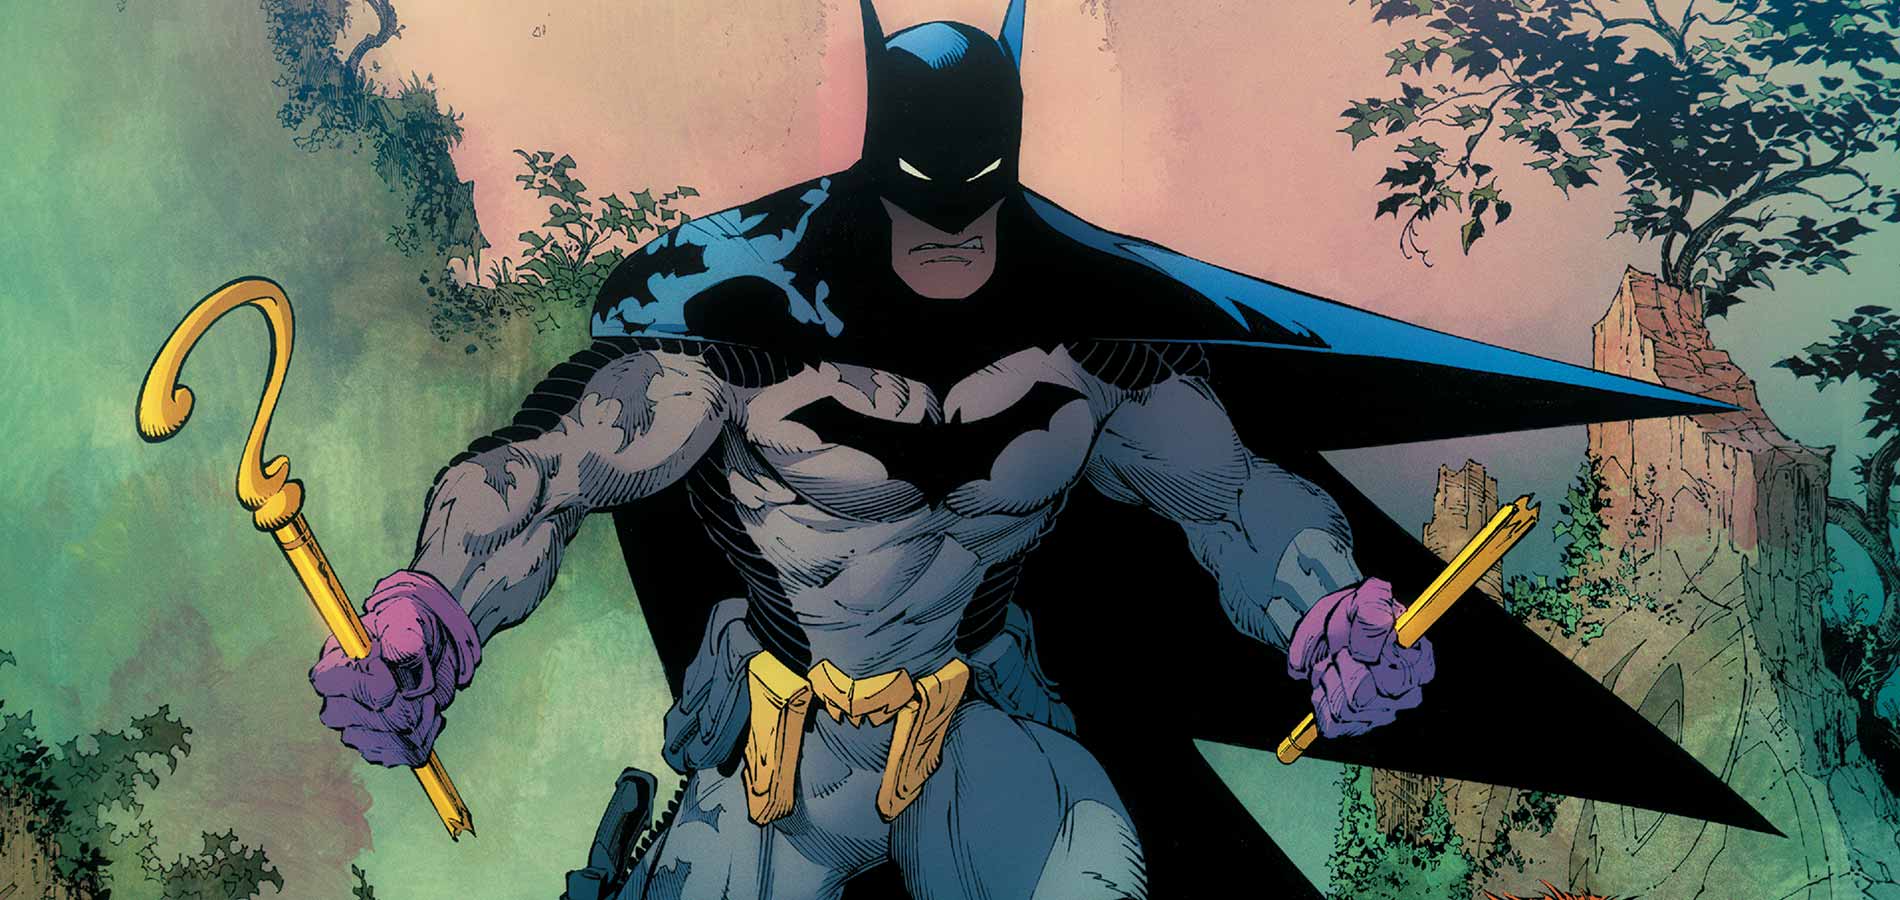 REPORT: 'THE BATMAN' Will Take Place 15 20 Years In The Past, Resembles ' Batman: Year One'